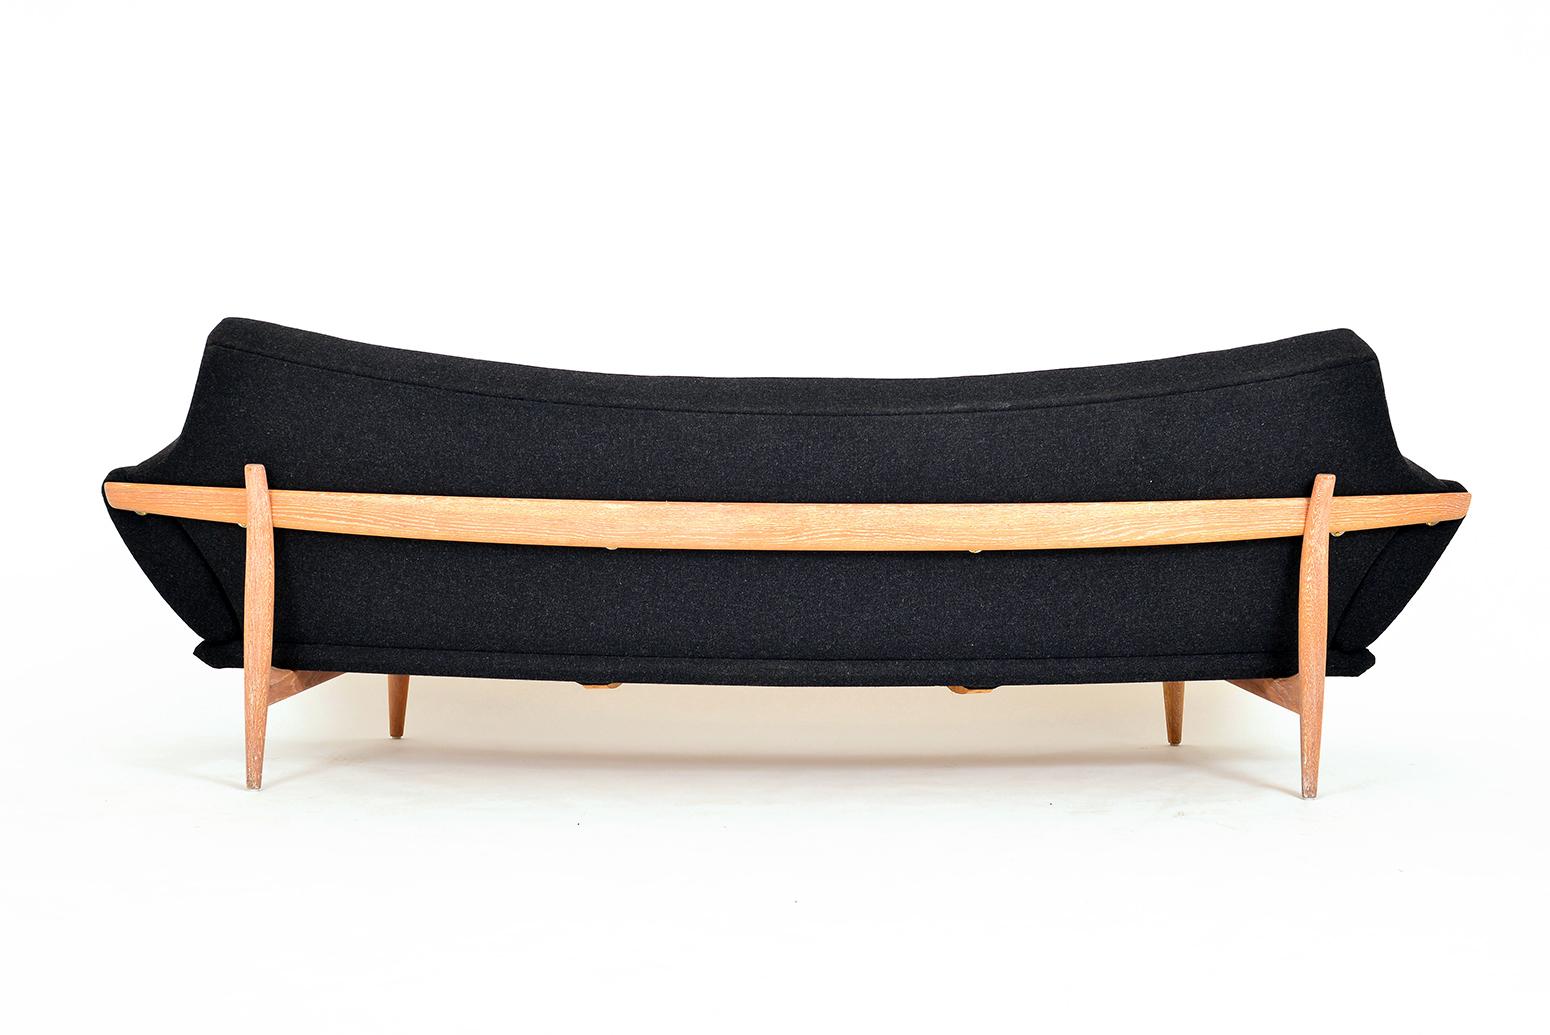 1960s Swedish Curved Sofa & Chair Johannes Andersen Trensums Mid-Century Modern For Sale 1